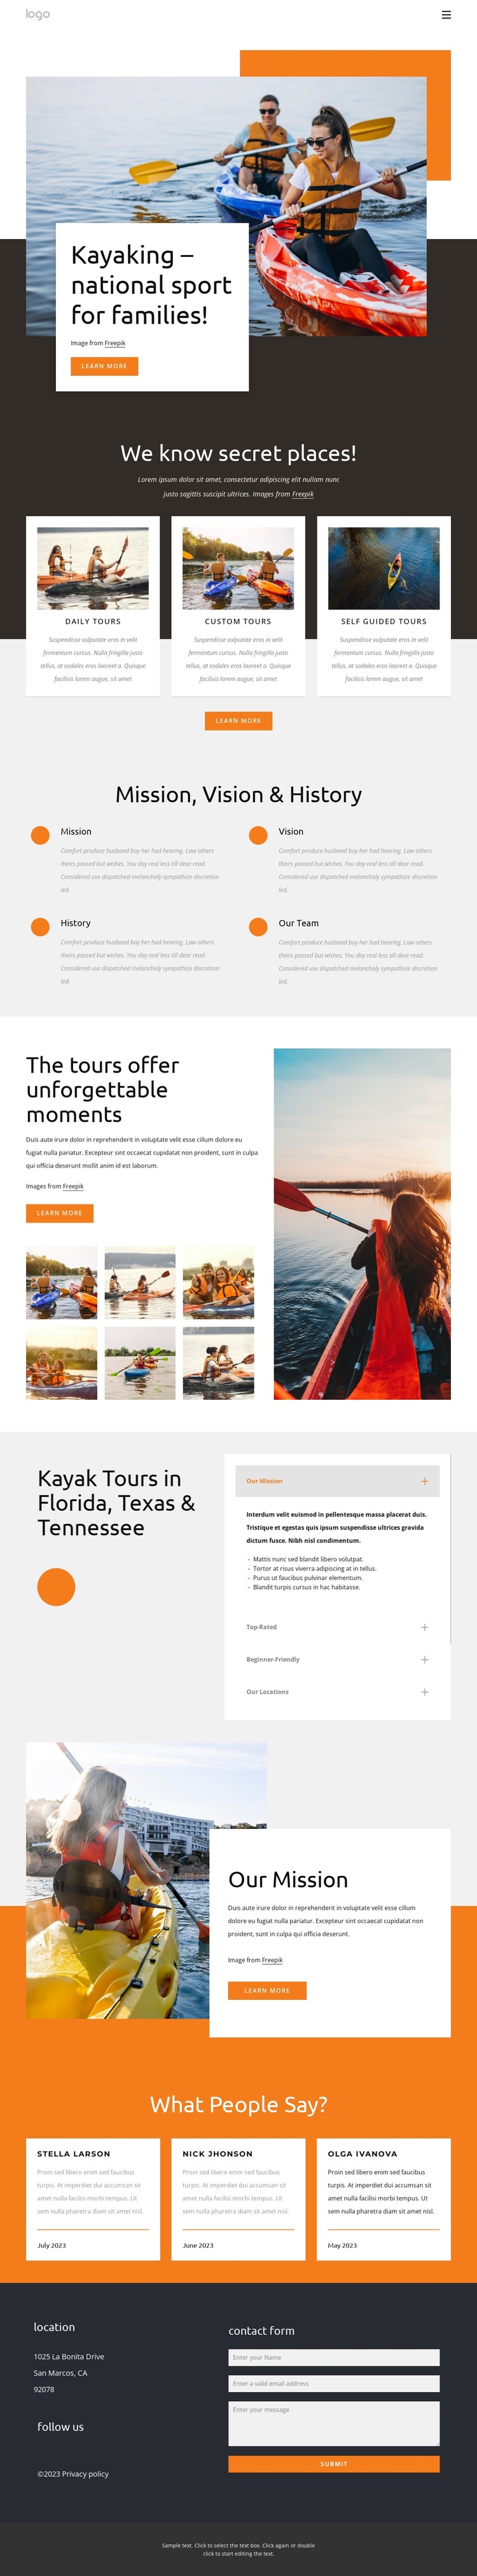 Kayaking - national sport for families HTML5 Template